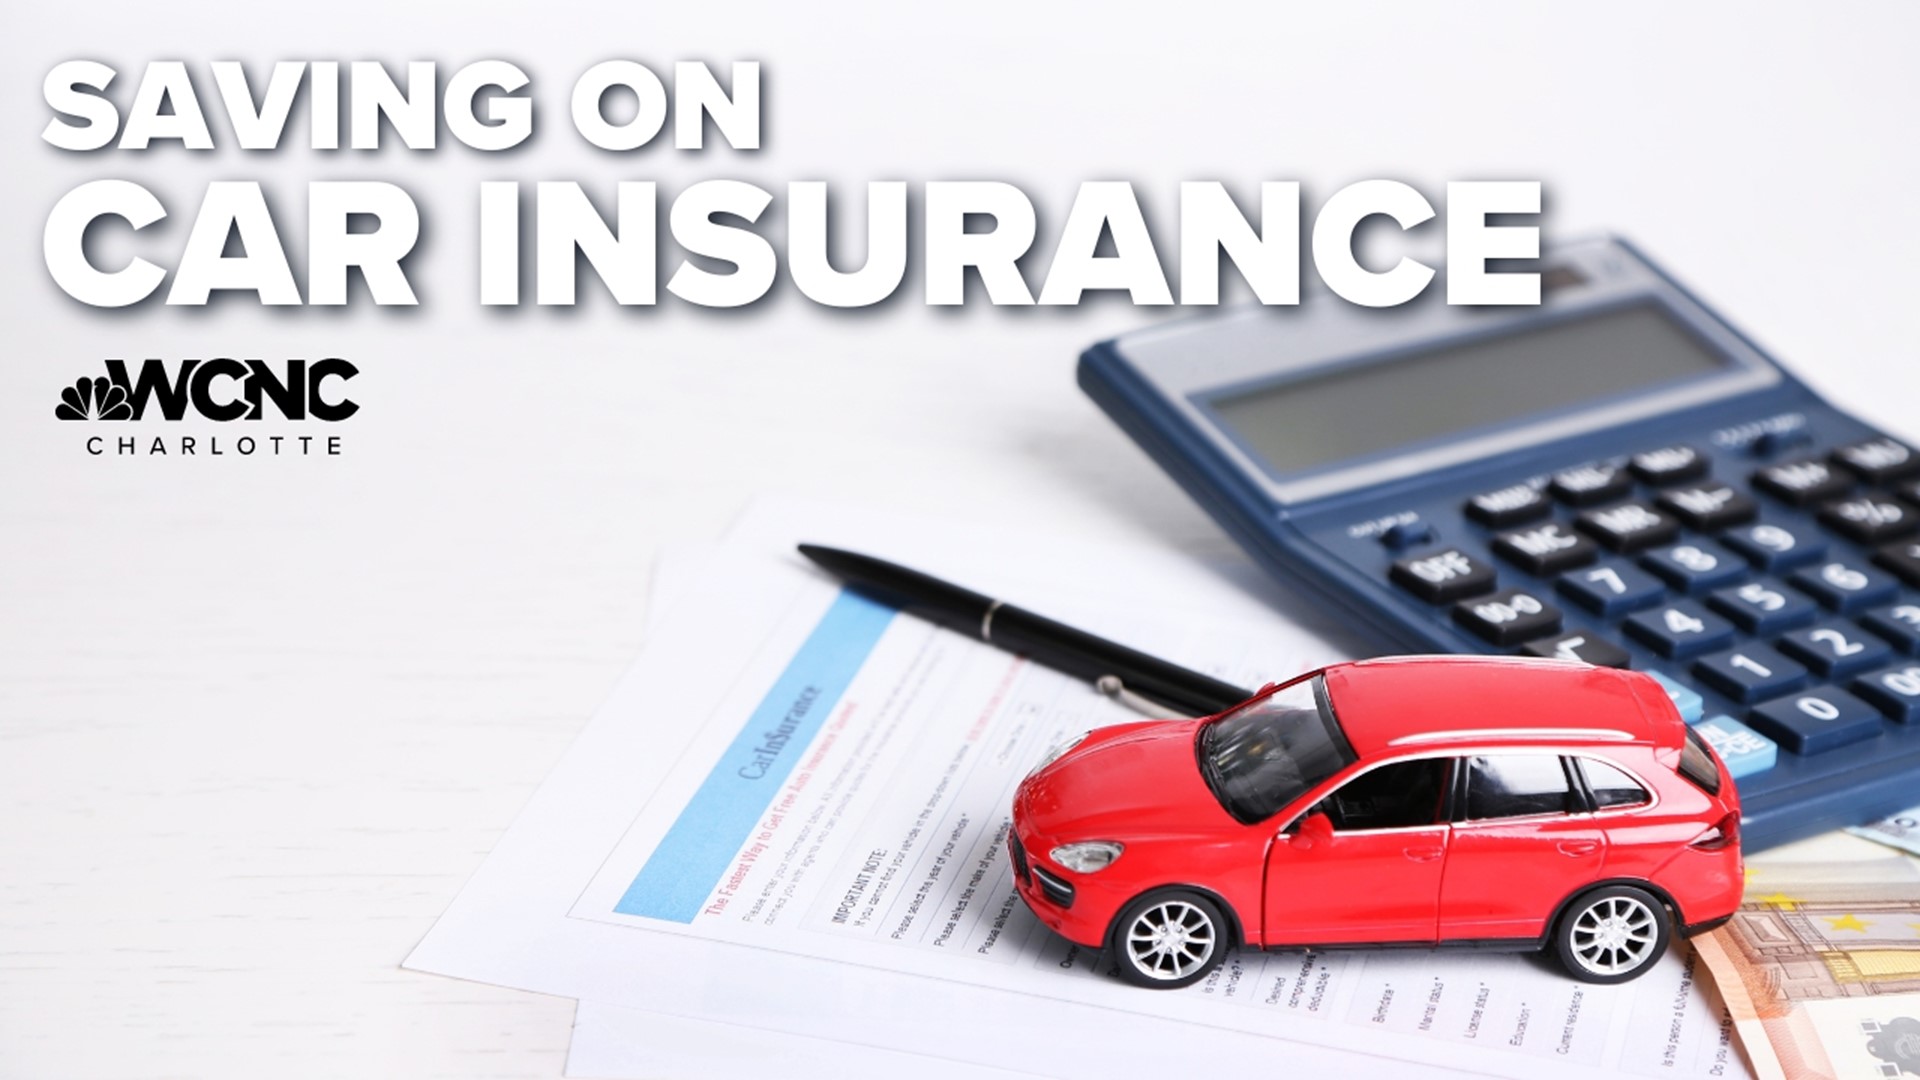 Carolyn Bruck gives us some tips to save you on your car insurance.